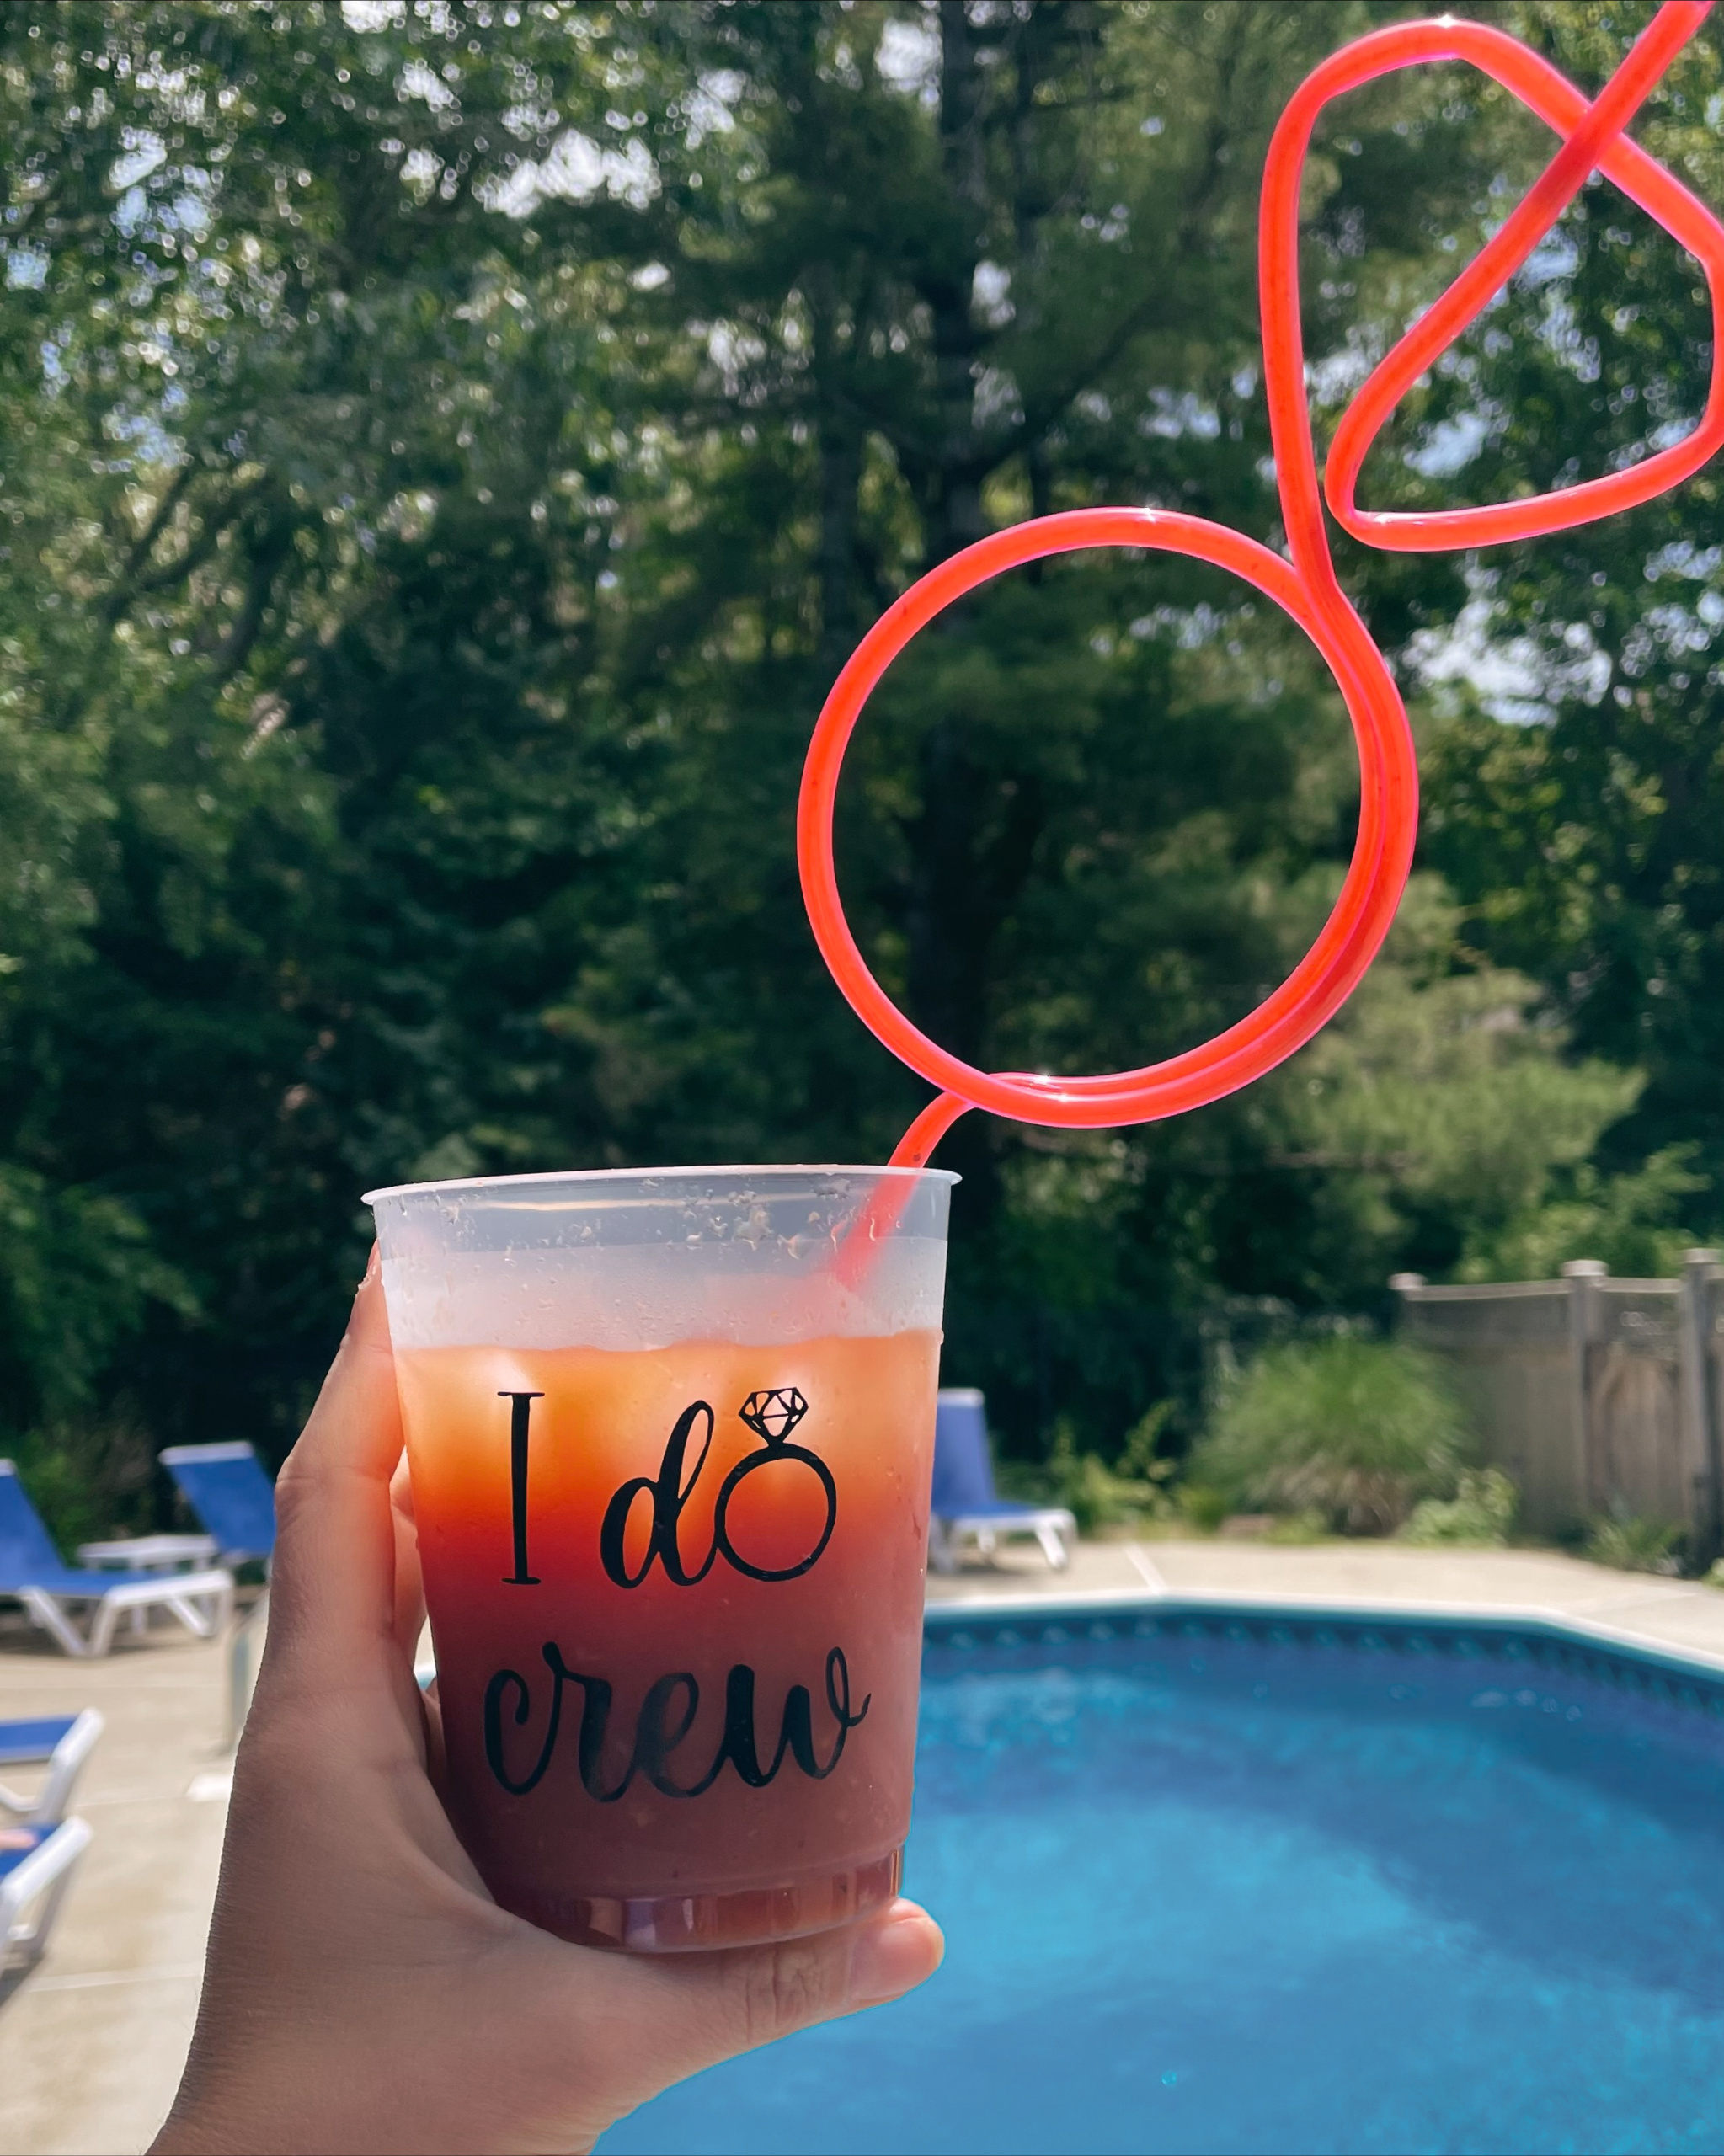 Everything You Need To Host a Coastal Bachelorette Weekend | Cape Cod Bachelorette | Wholesome Bachelorette Ideas | Cape Cad Massachusetts Bachelorette Itinerary | What To Do In Cape Cod for A Bachelorette Party | New England Bachelorette | Coastal Bachelorette Party Theme | Bachelorette Themes | How To Host A Coastal Bachelorette | Decorations I Do Crew Cups and Engagement Ring Straw | Simply by Simone